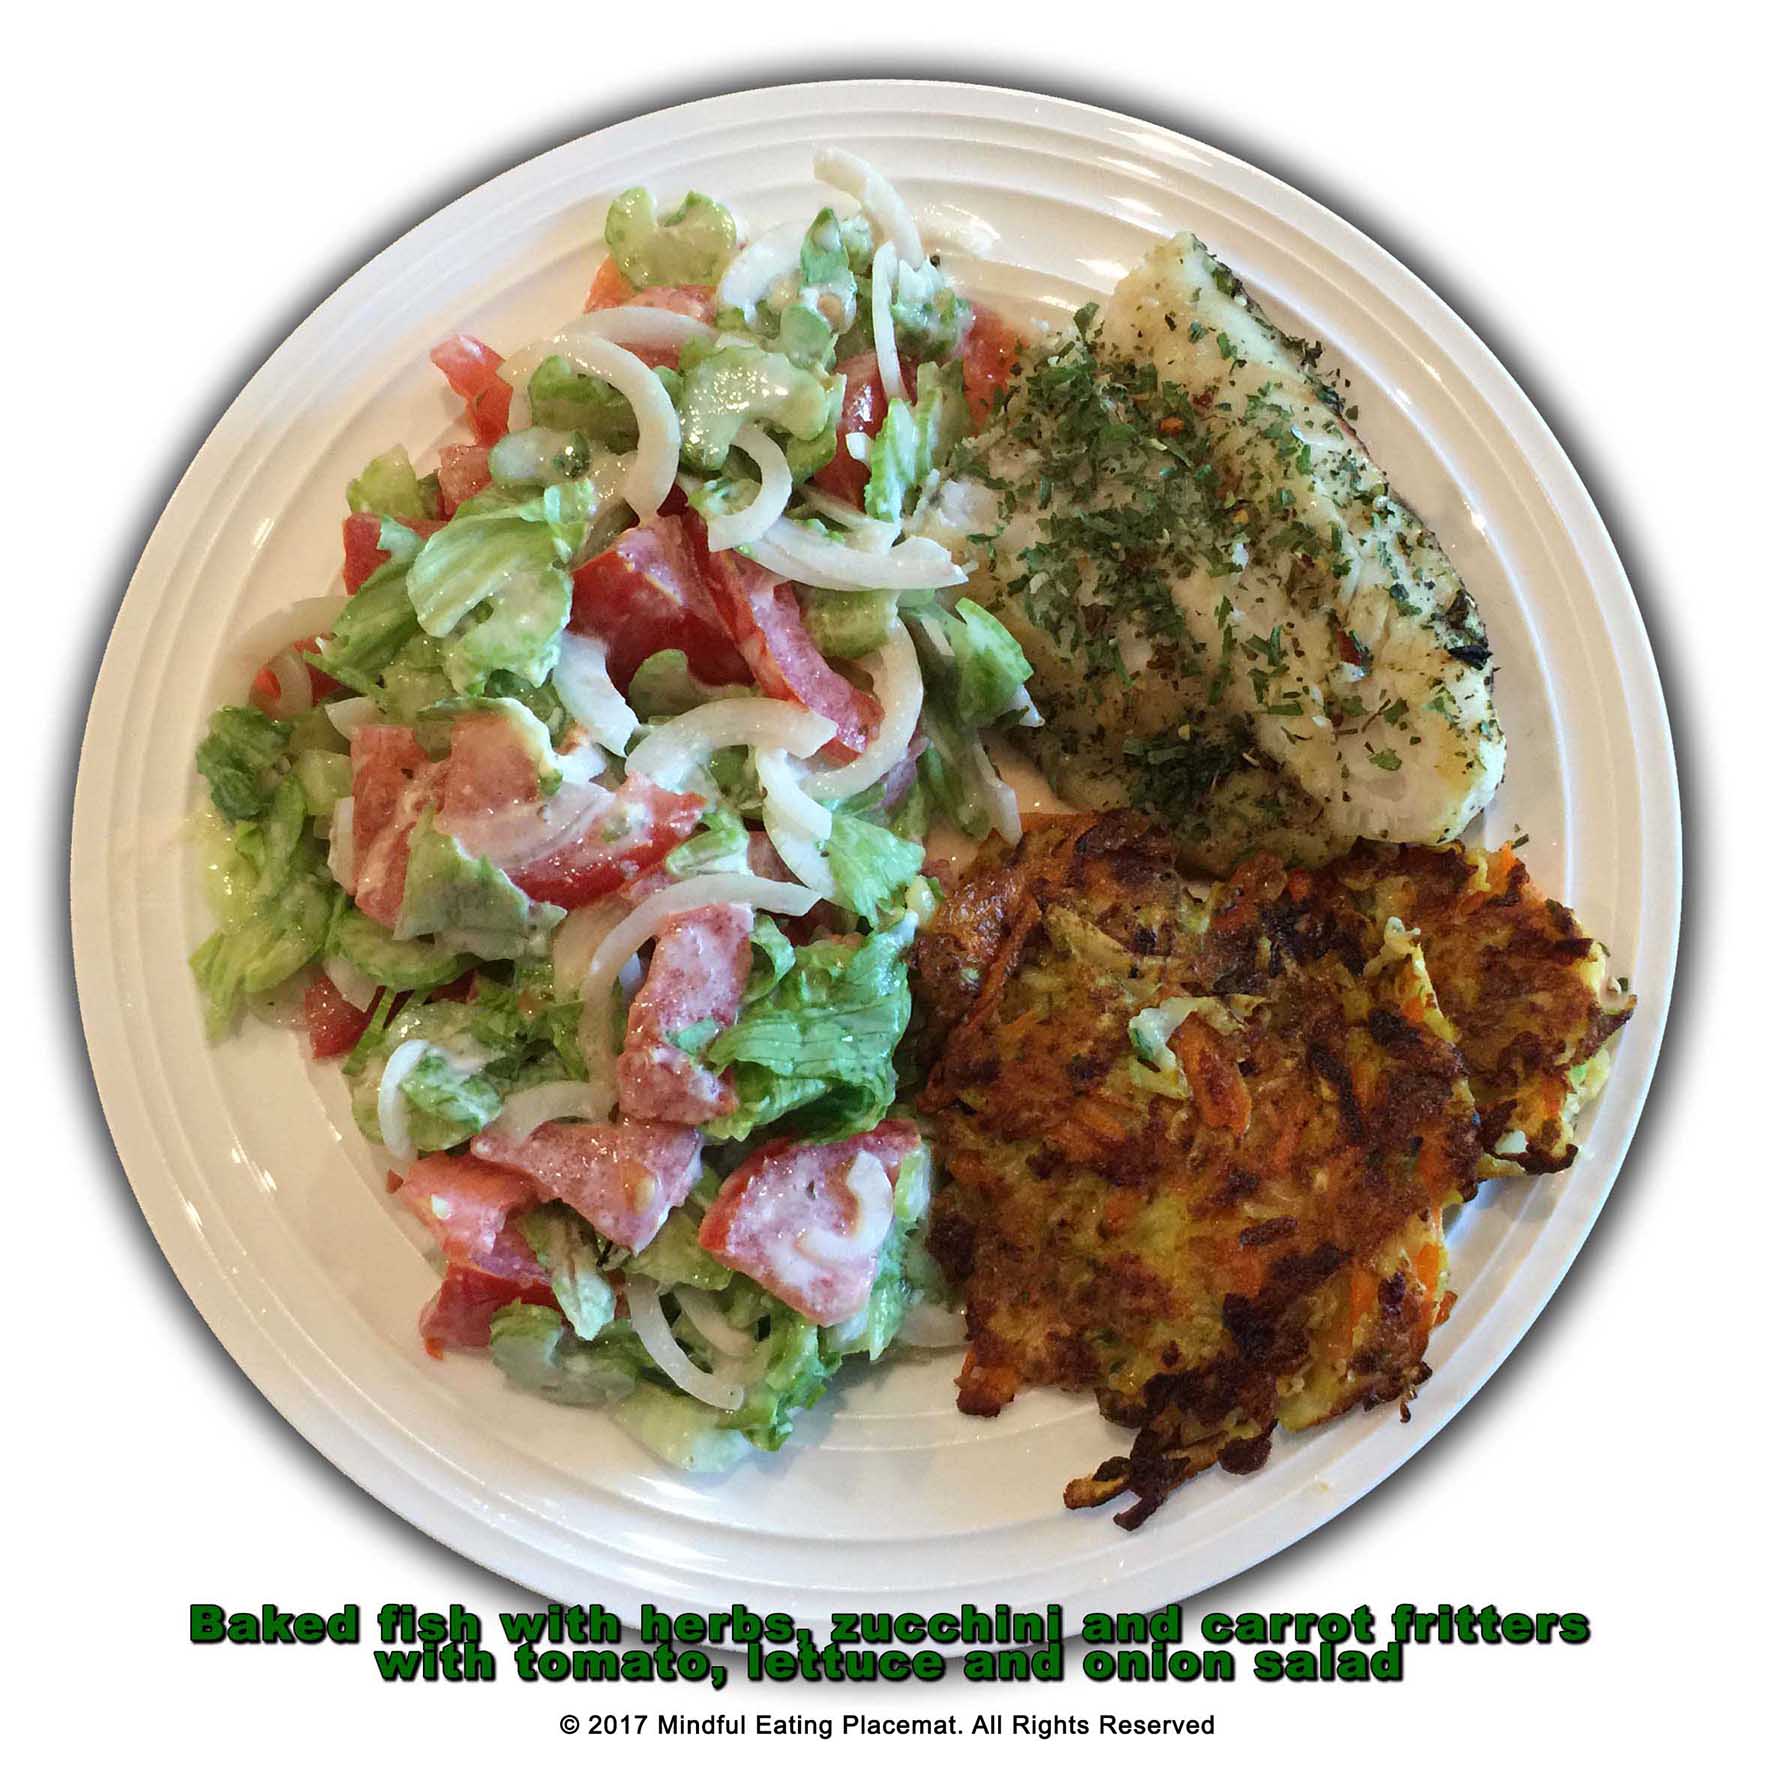 Baked fish with zucchini and carrot fritters and side salad